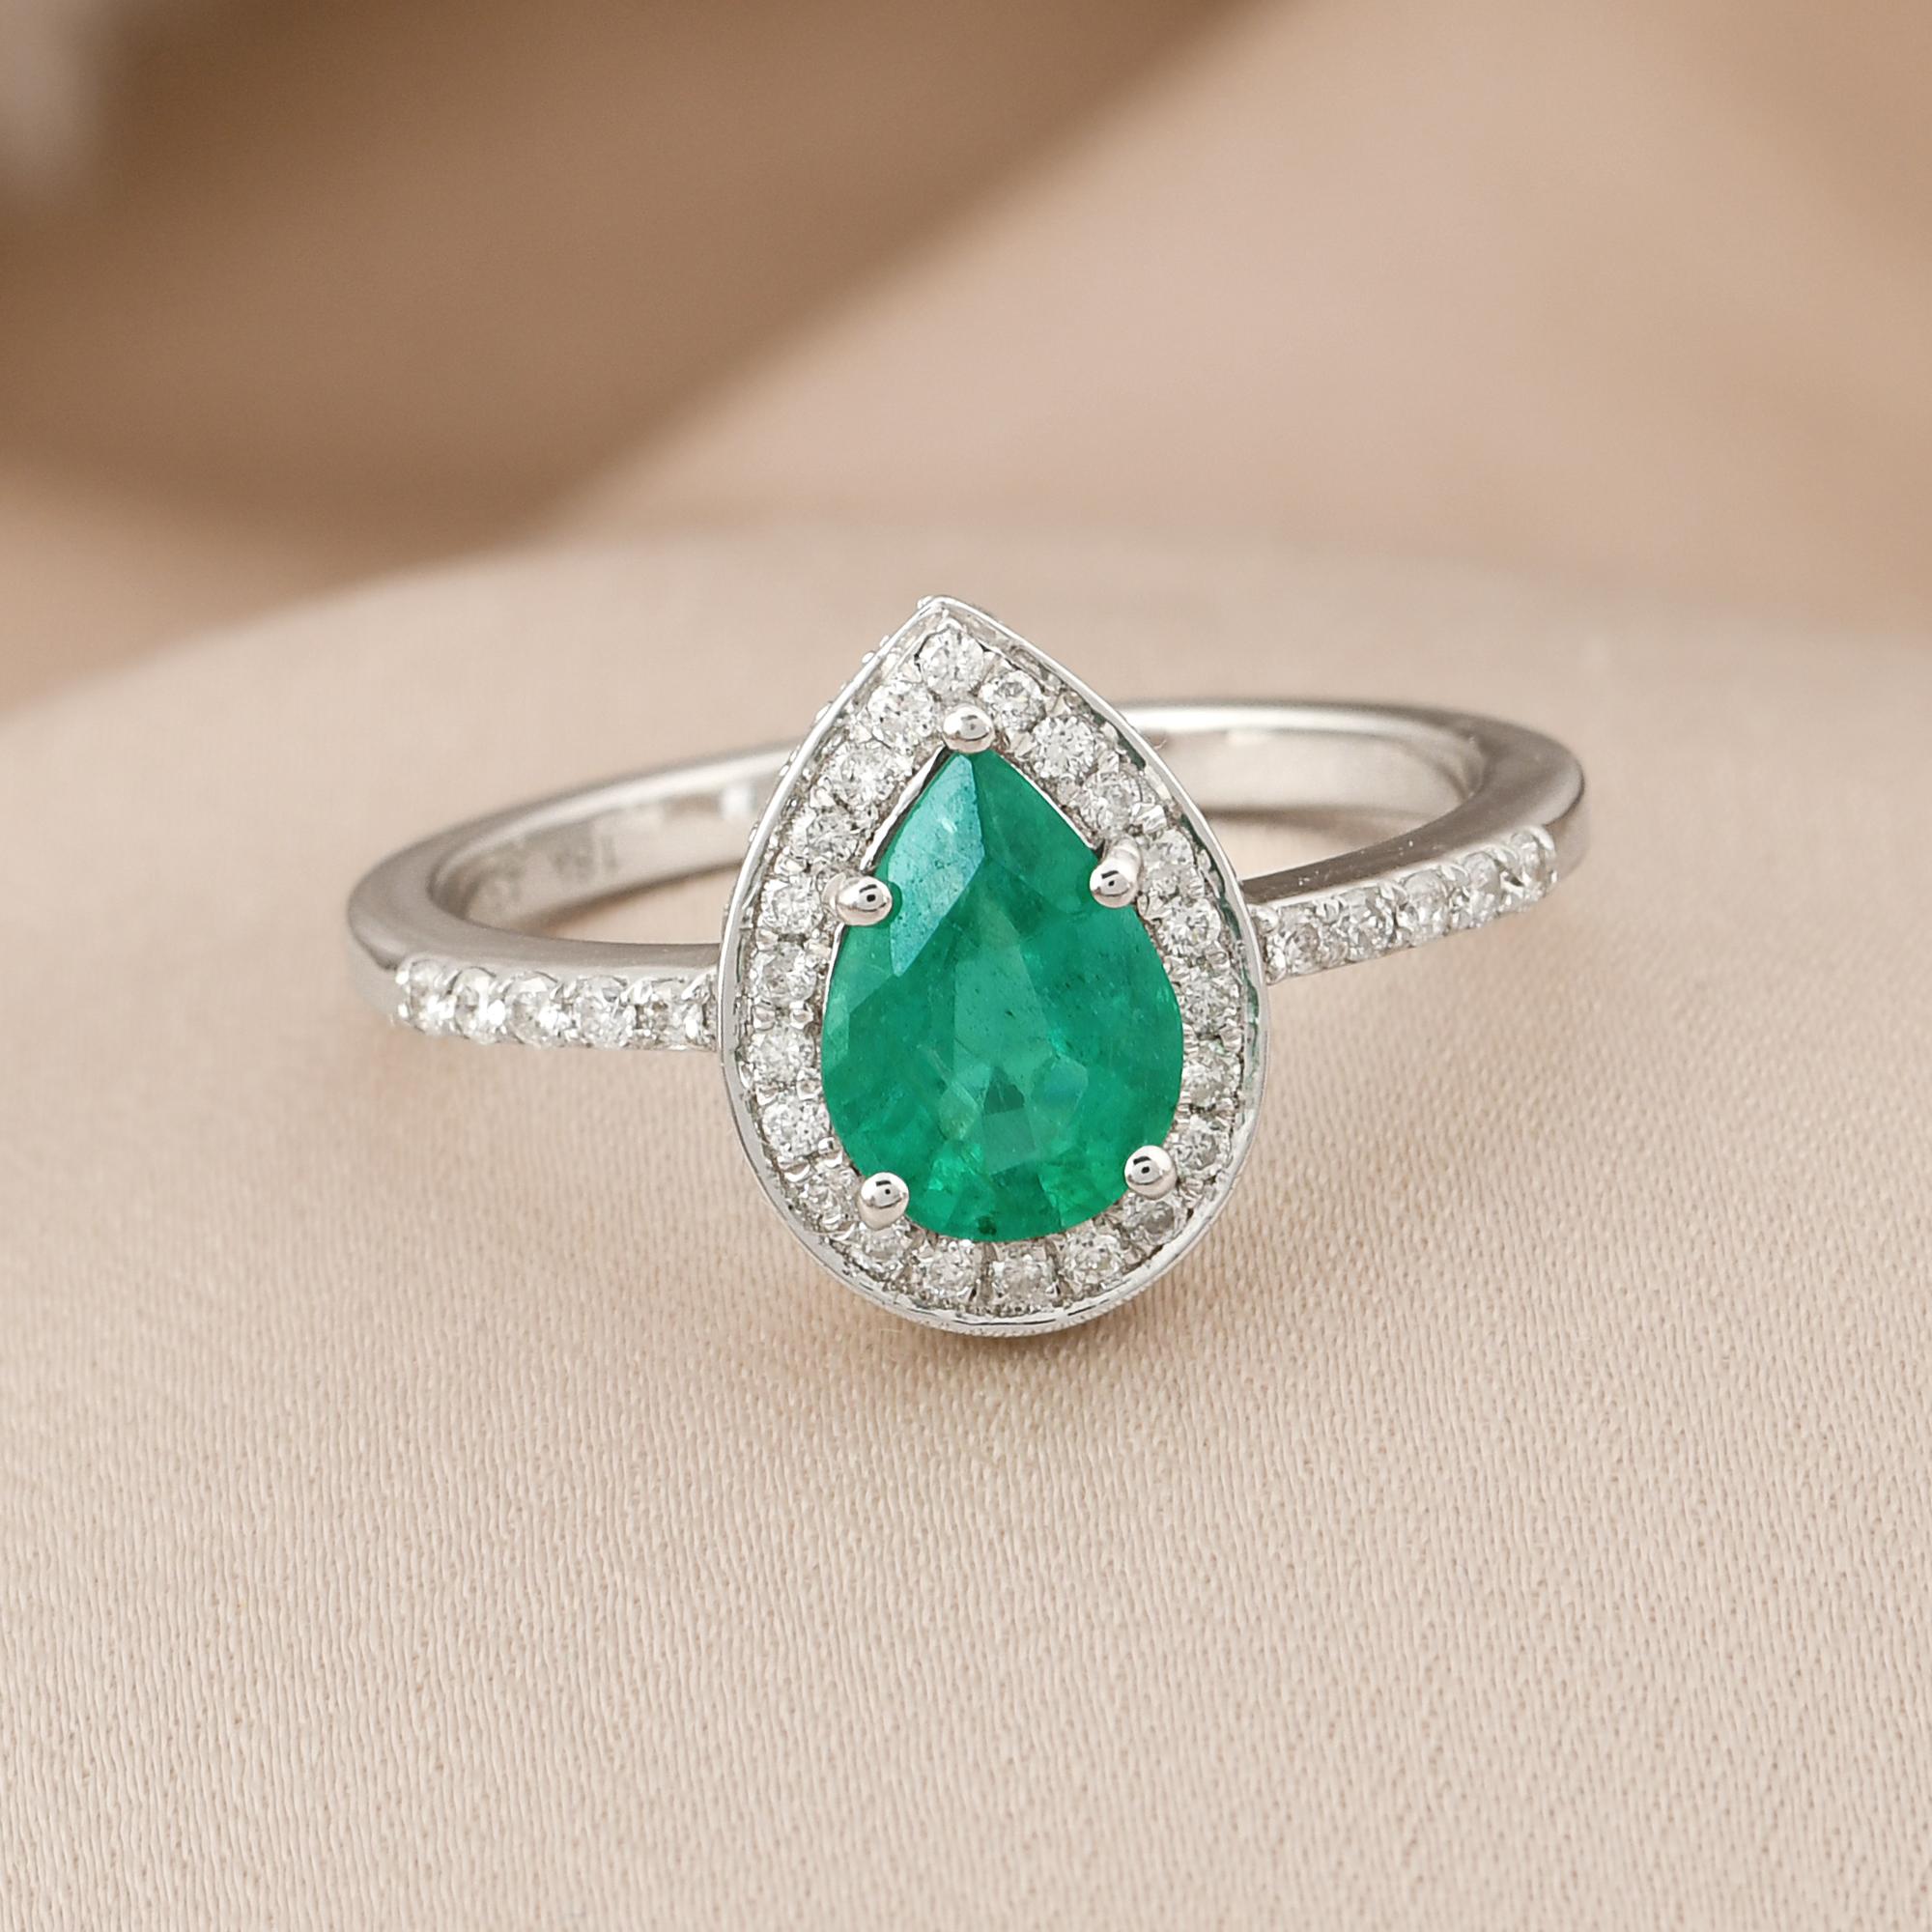 Pear Cut 1.40 Tcw Pear Natural Emerald Gemstone Halo Ring Diamond 14k White Gold Jewelry For Sale